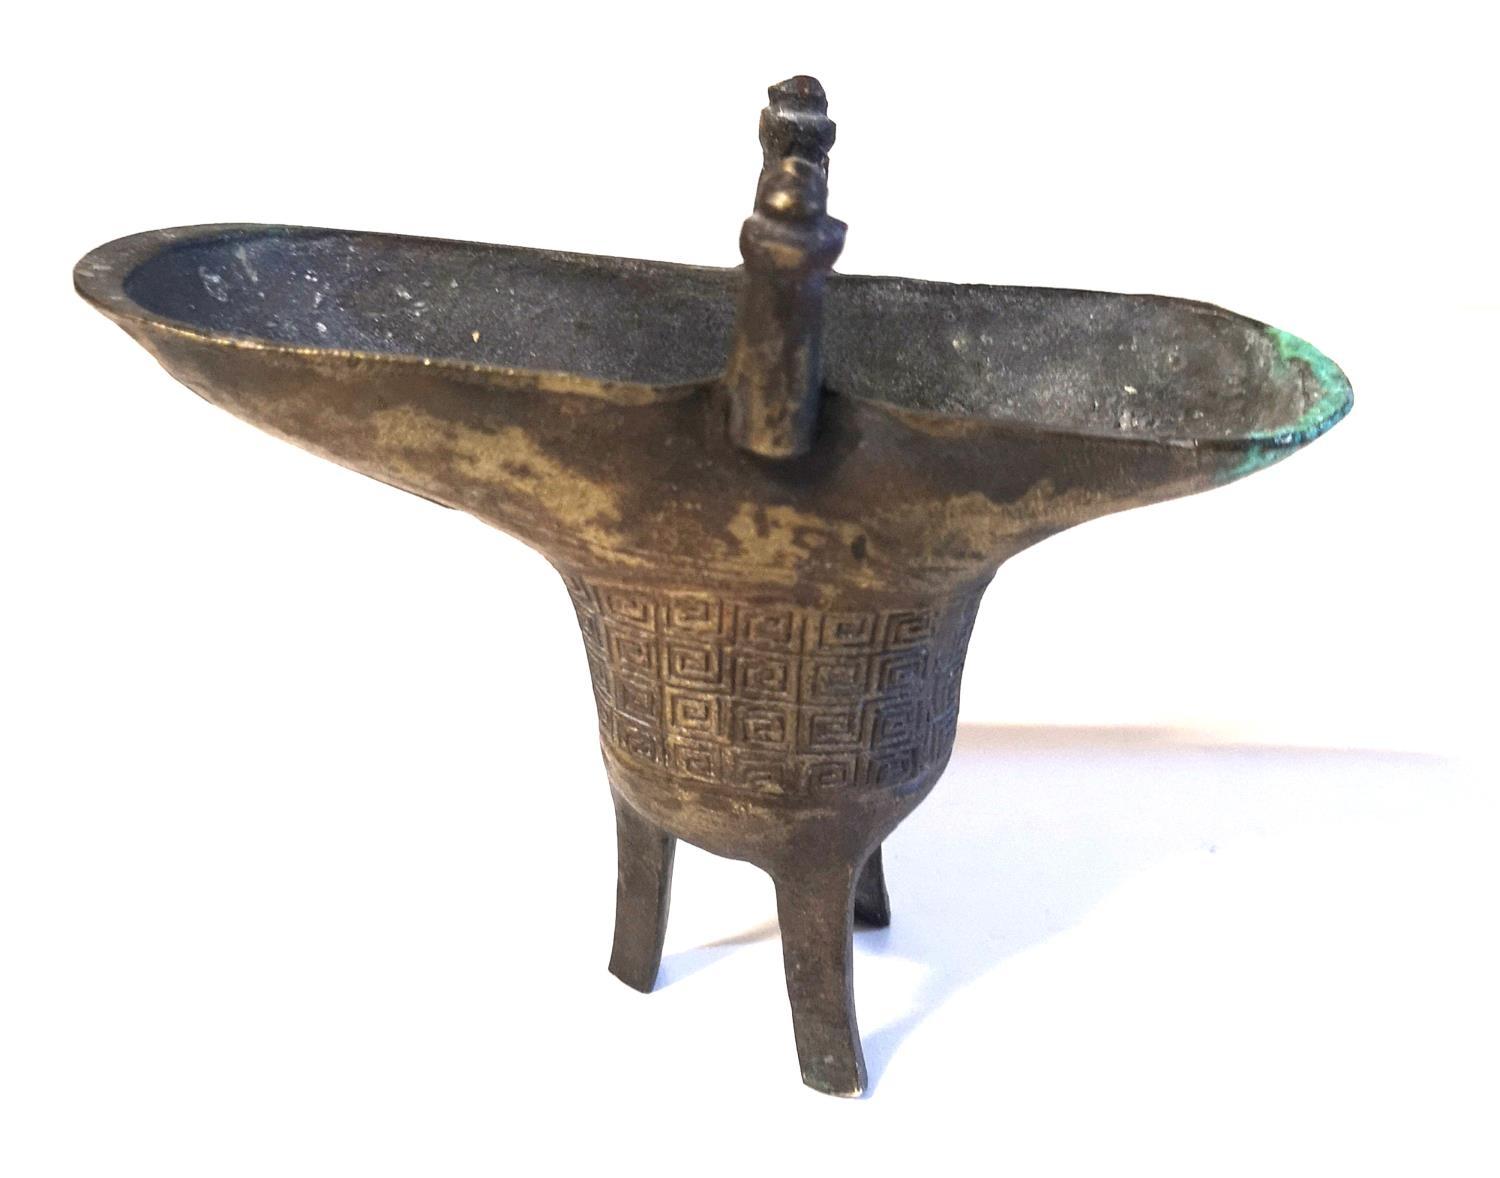 A CHINESE ARCHAIC FORM BRONZE OVAL EWER With geometric decoration and tripod legs, bearing a '